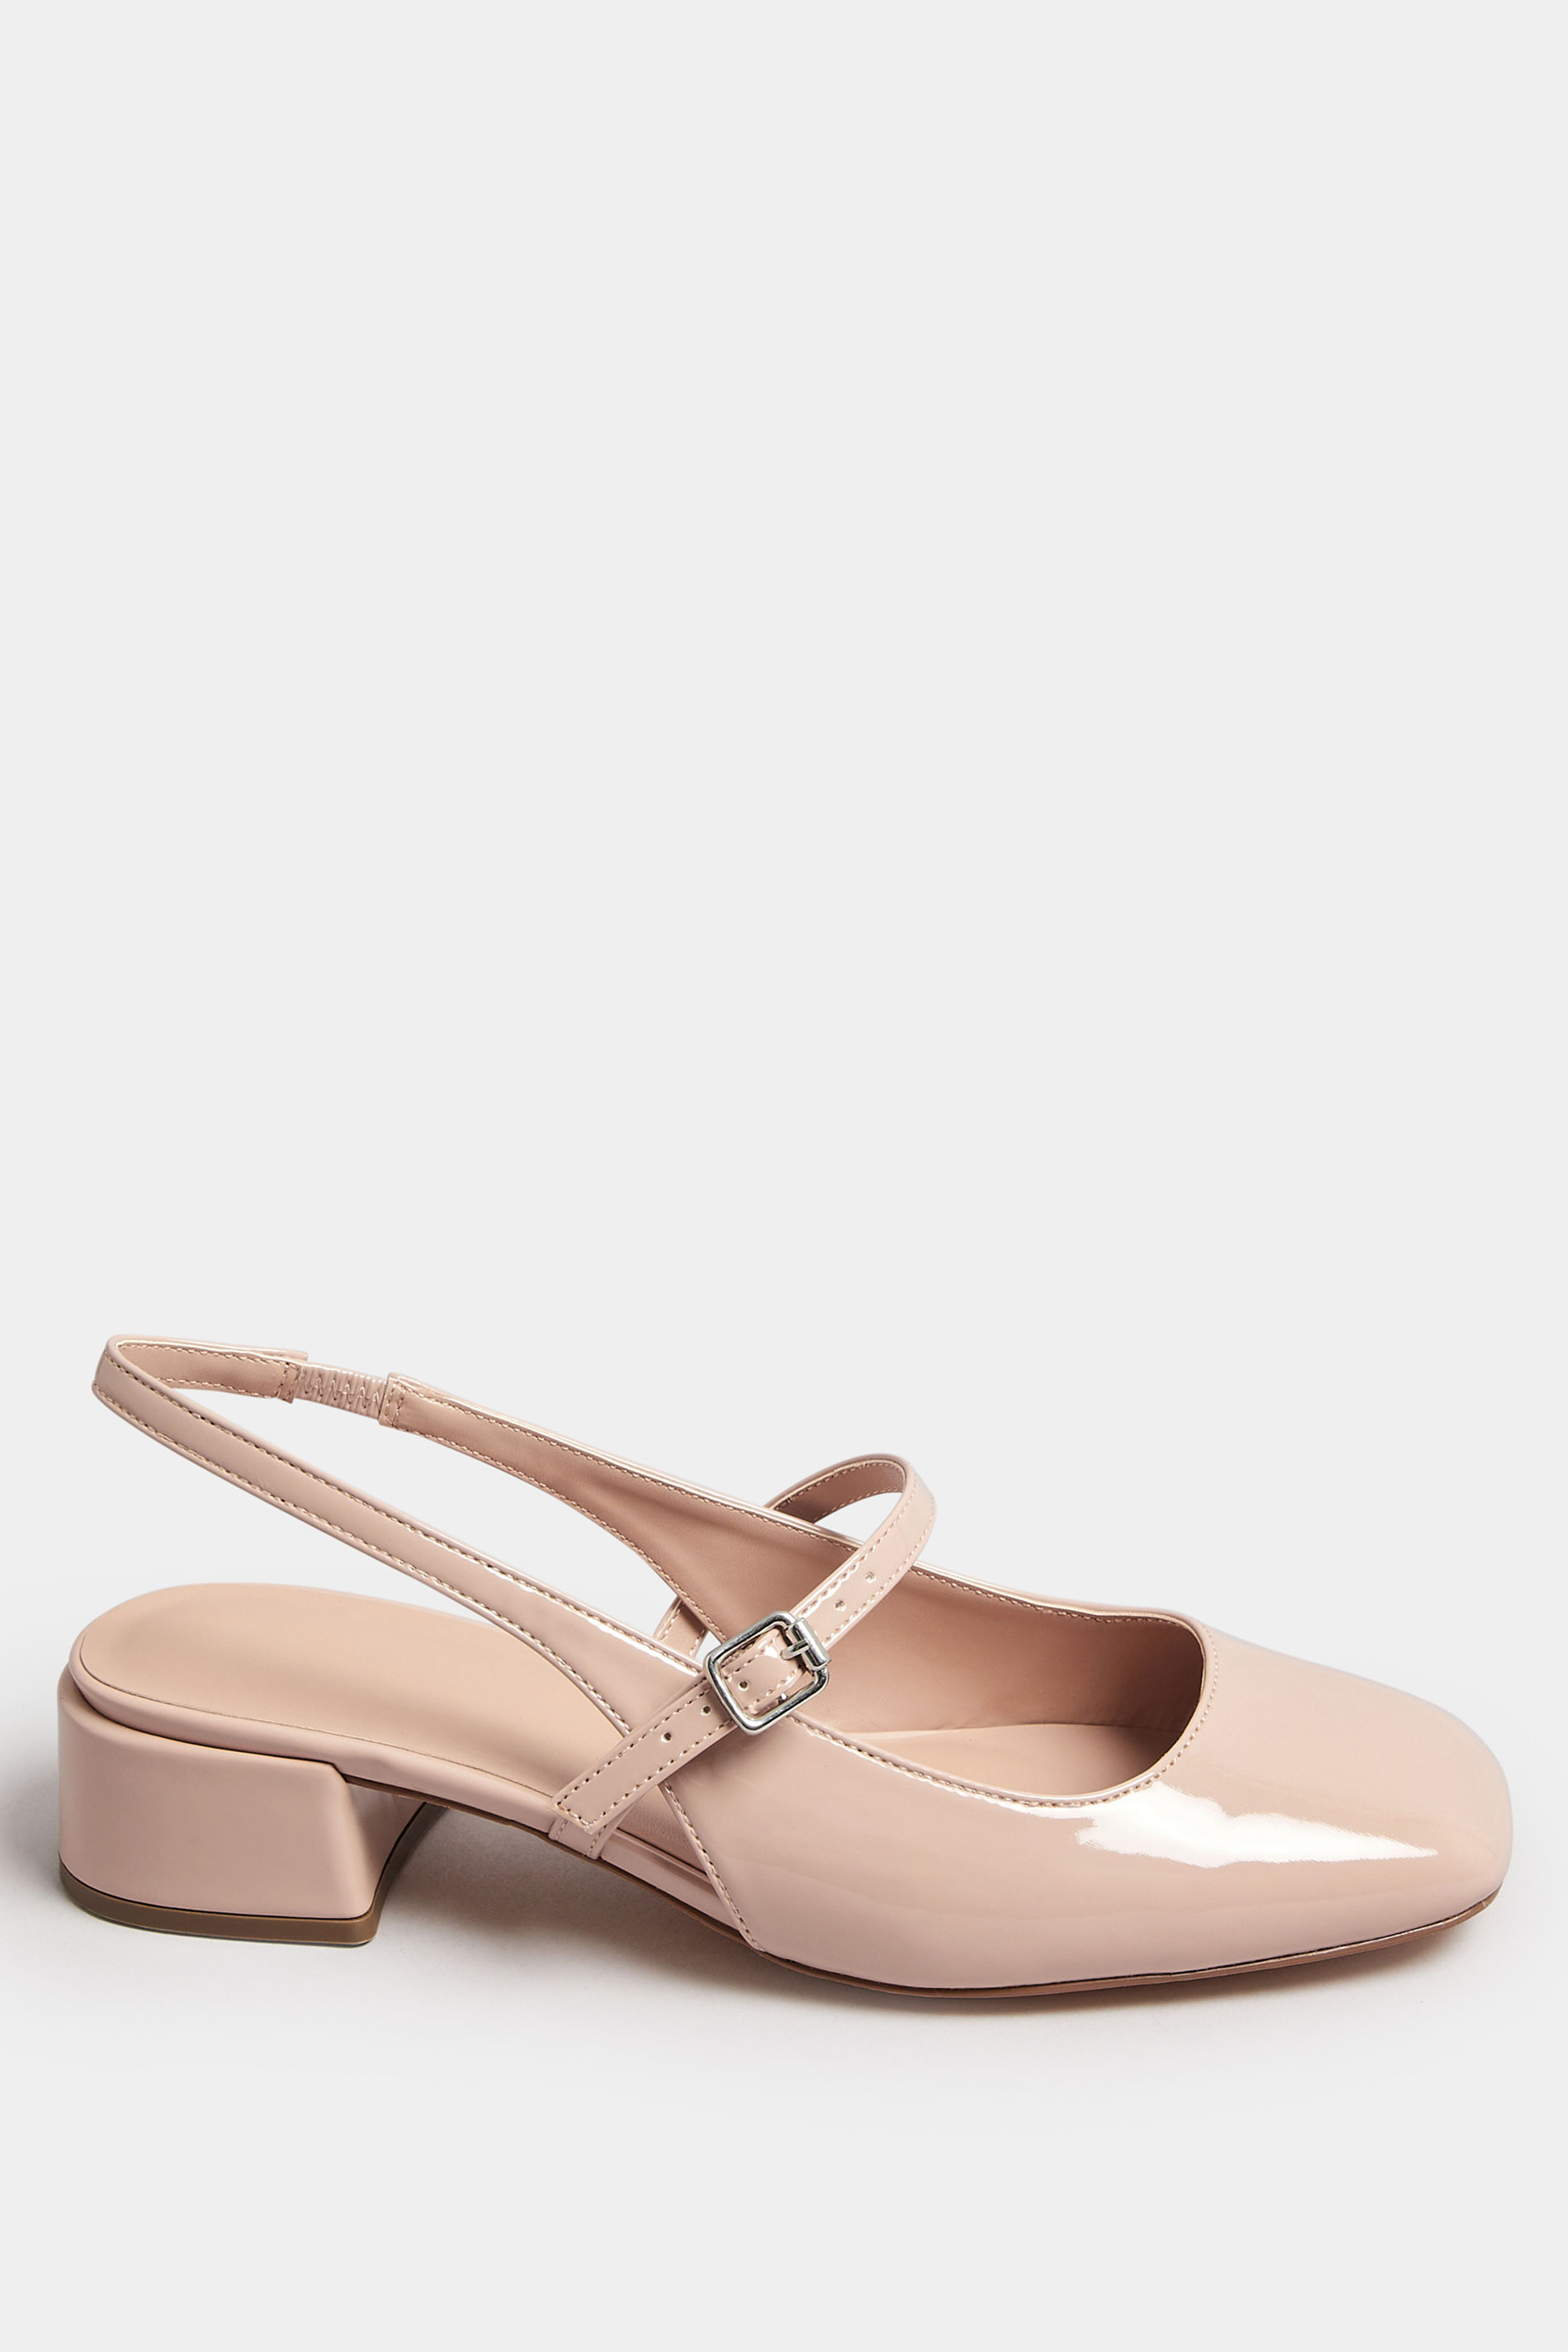 Nude Patent Mary Jane Slingback Heels In Extra Wide EEE Fit | Yours Clothing 2